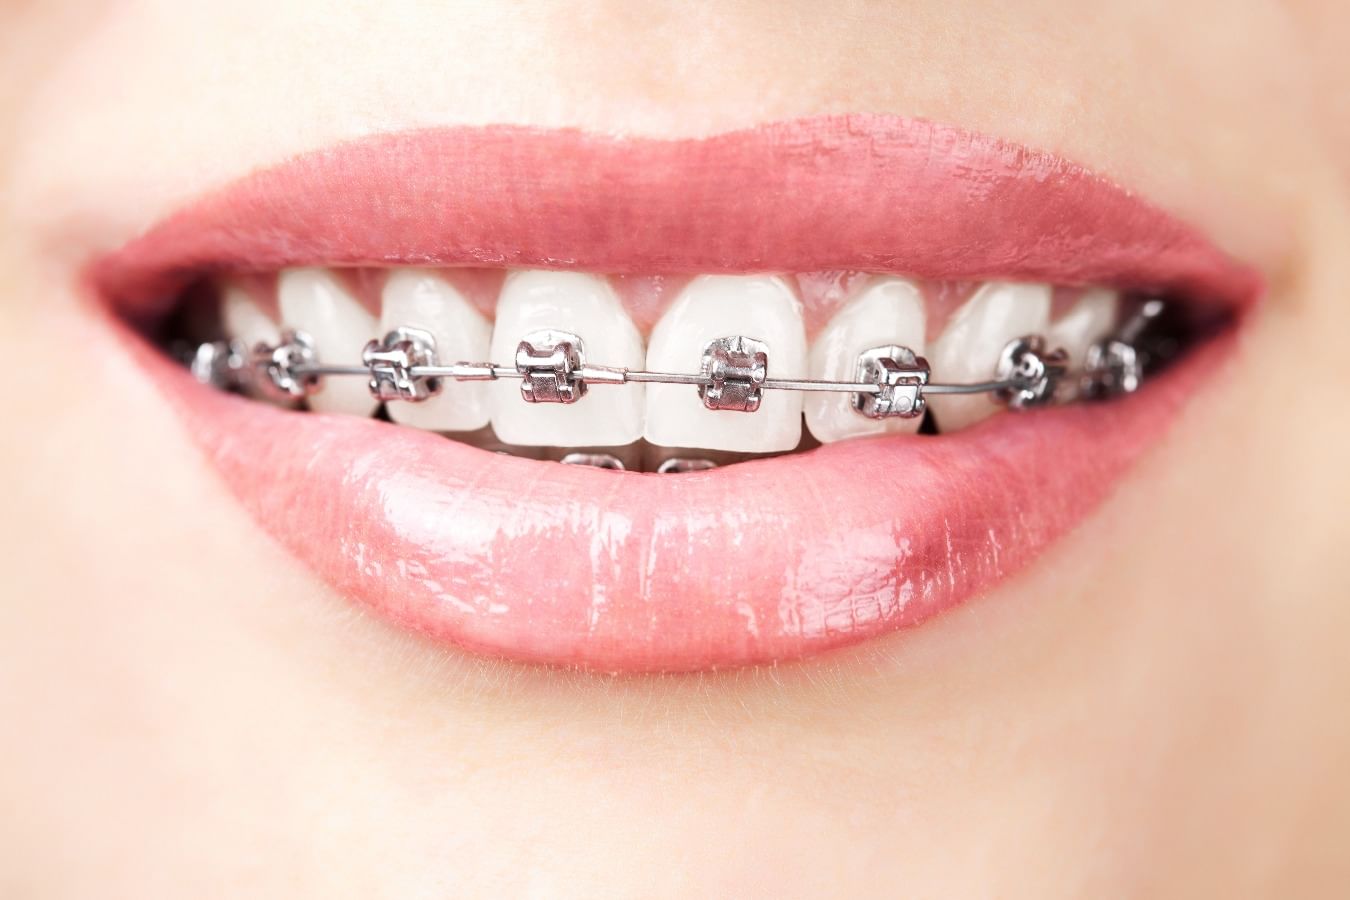 Orthodontic treatment for adults